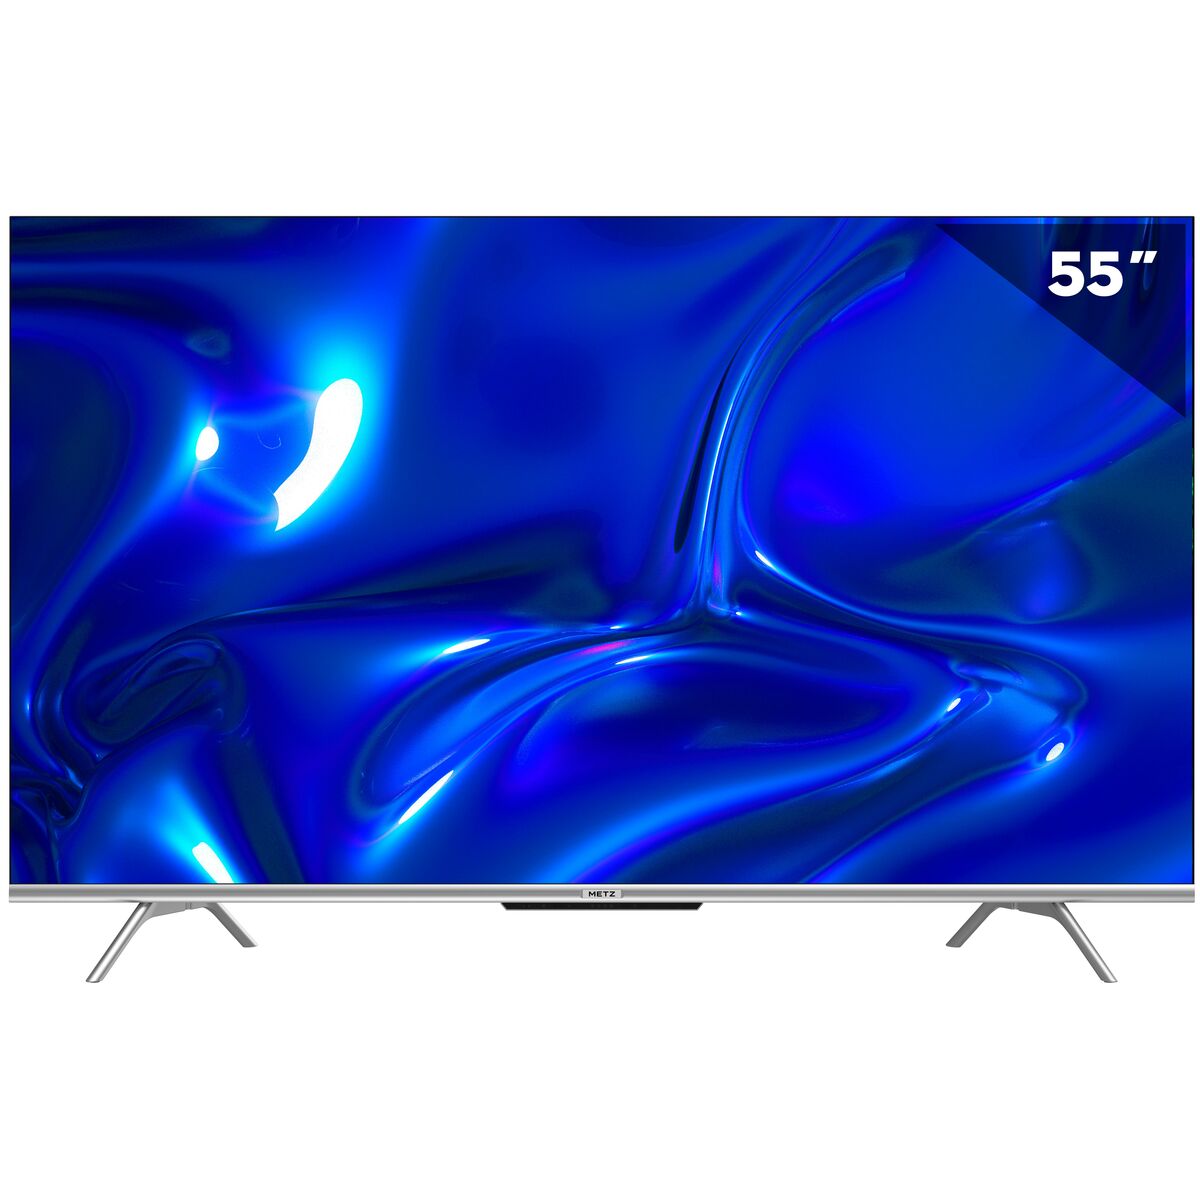 Smart TV Metz 55MUD7000Y Full HD 55" LED, Metz, Electronics, TV, Video and home cinema, smart-tv-metz-55mud7000y-full-hd-55-led, Brand_Metz, category-reference-2609, category-reference-2625, category-reference-2931, category-reference-t-18805, category-reference-t-18827, category-reference-t-19653, cinema and television, Condition_NEW, entertainment, Price_400 - 500, UEFA Euro 2020, RiotNook